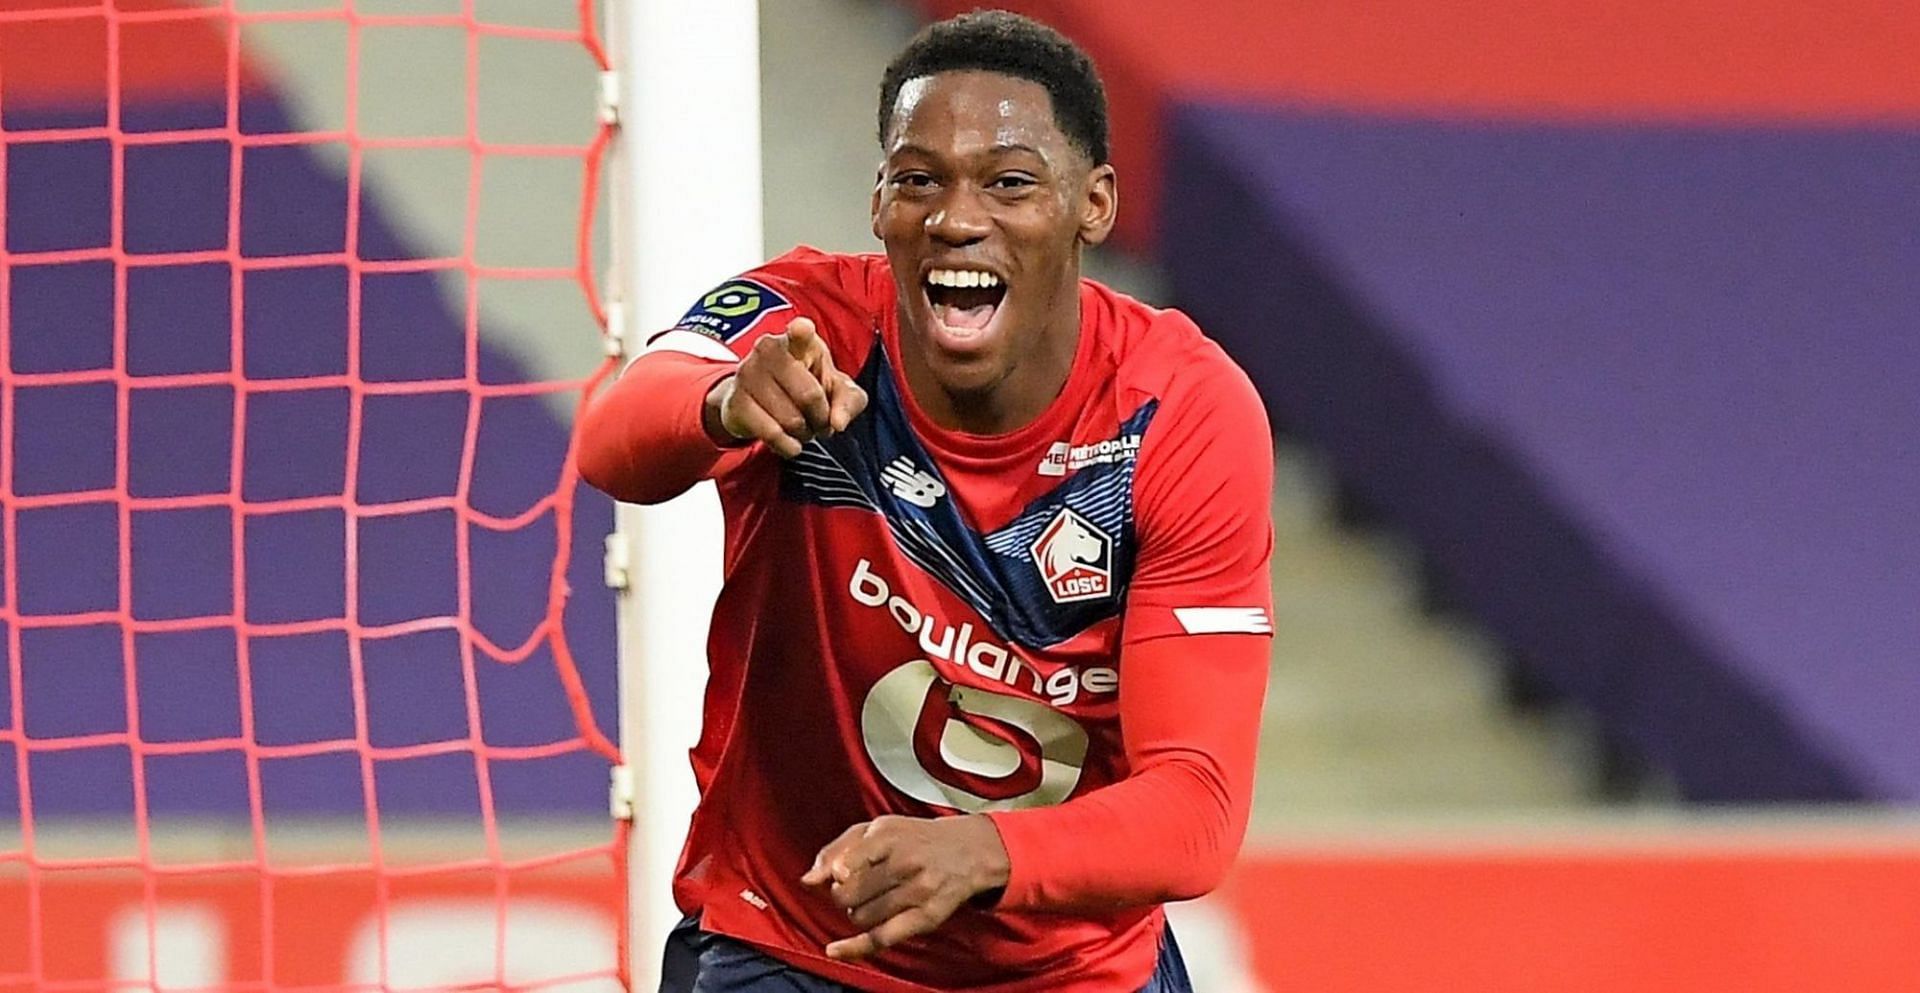 David is having yet another brilliant Ligue 1 season with Lille (Pic: Twitter)